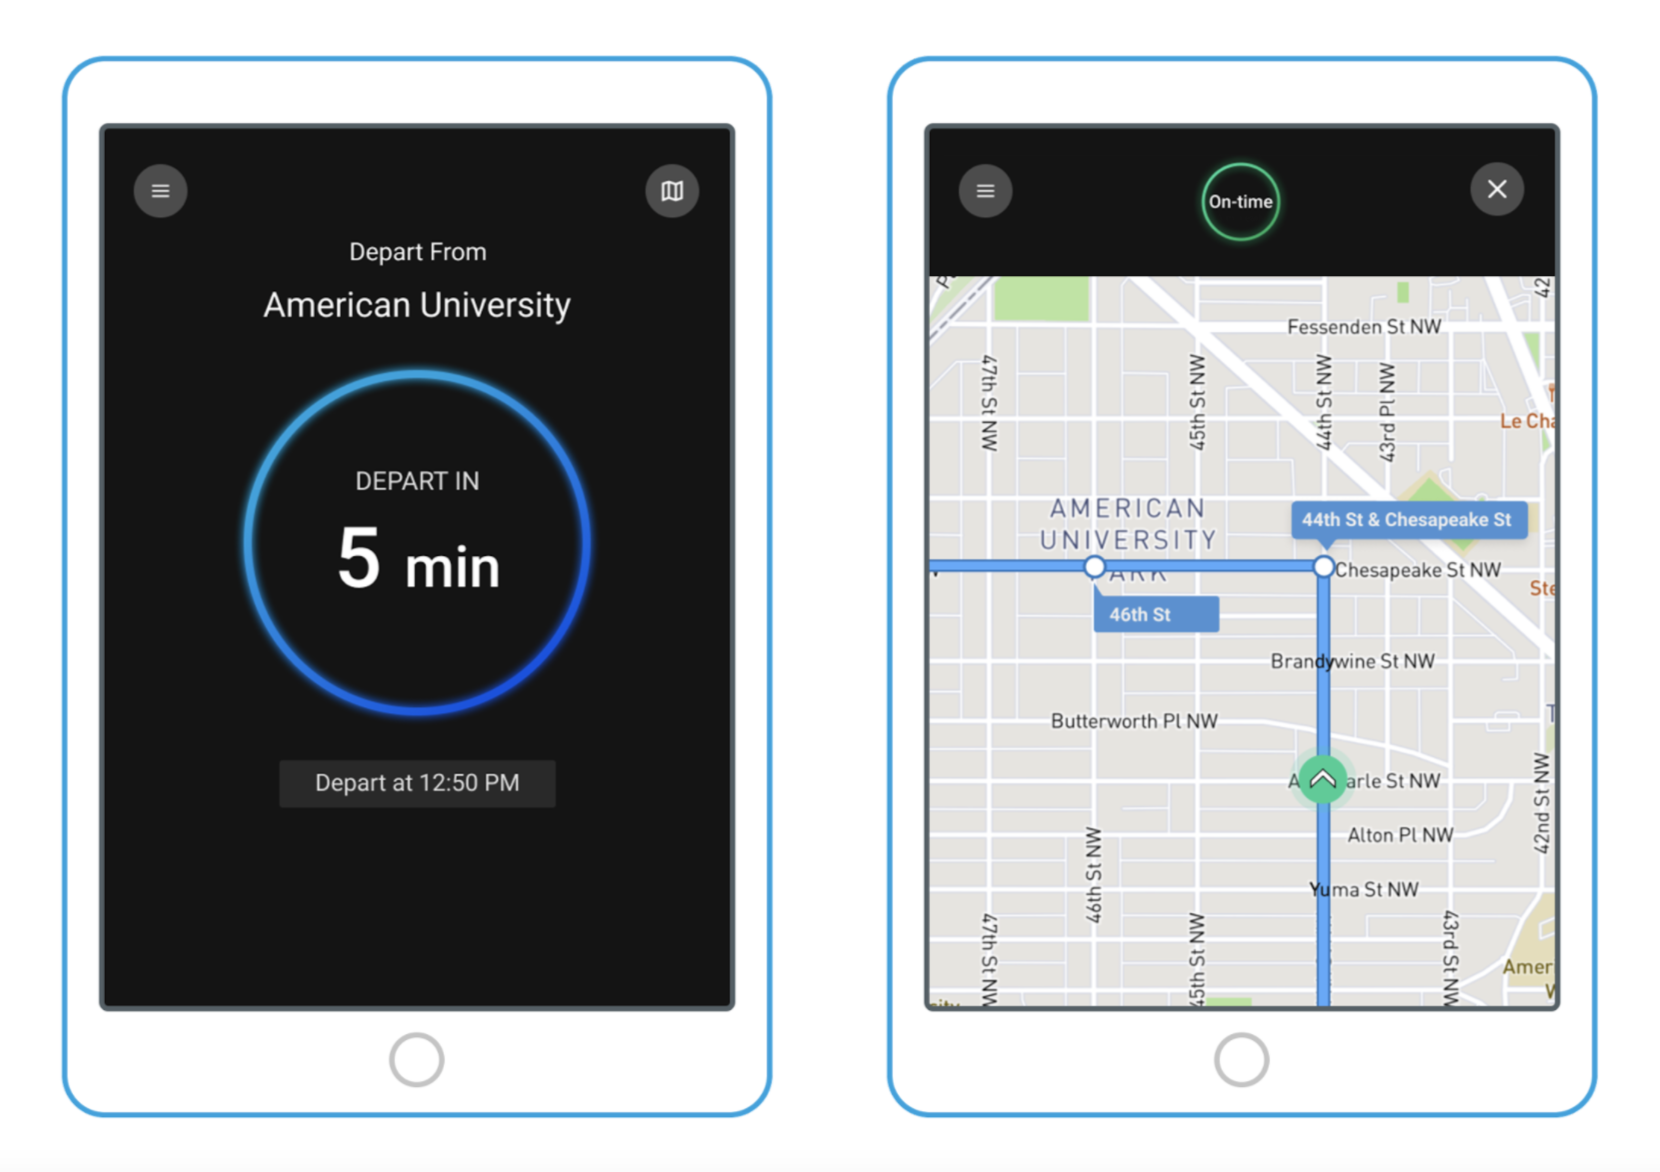 Swiftly’s onboard app enables you to share real-time performance directly with operators in an intuitive on-board display. View routes, timepoints, and real-time vehicle location. Provide real-time feedback to operators about performance to mitigate early departures and bunching. 